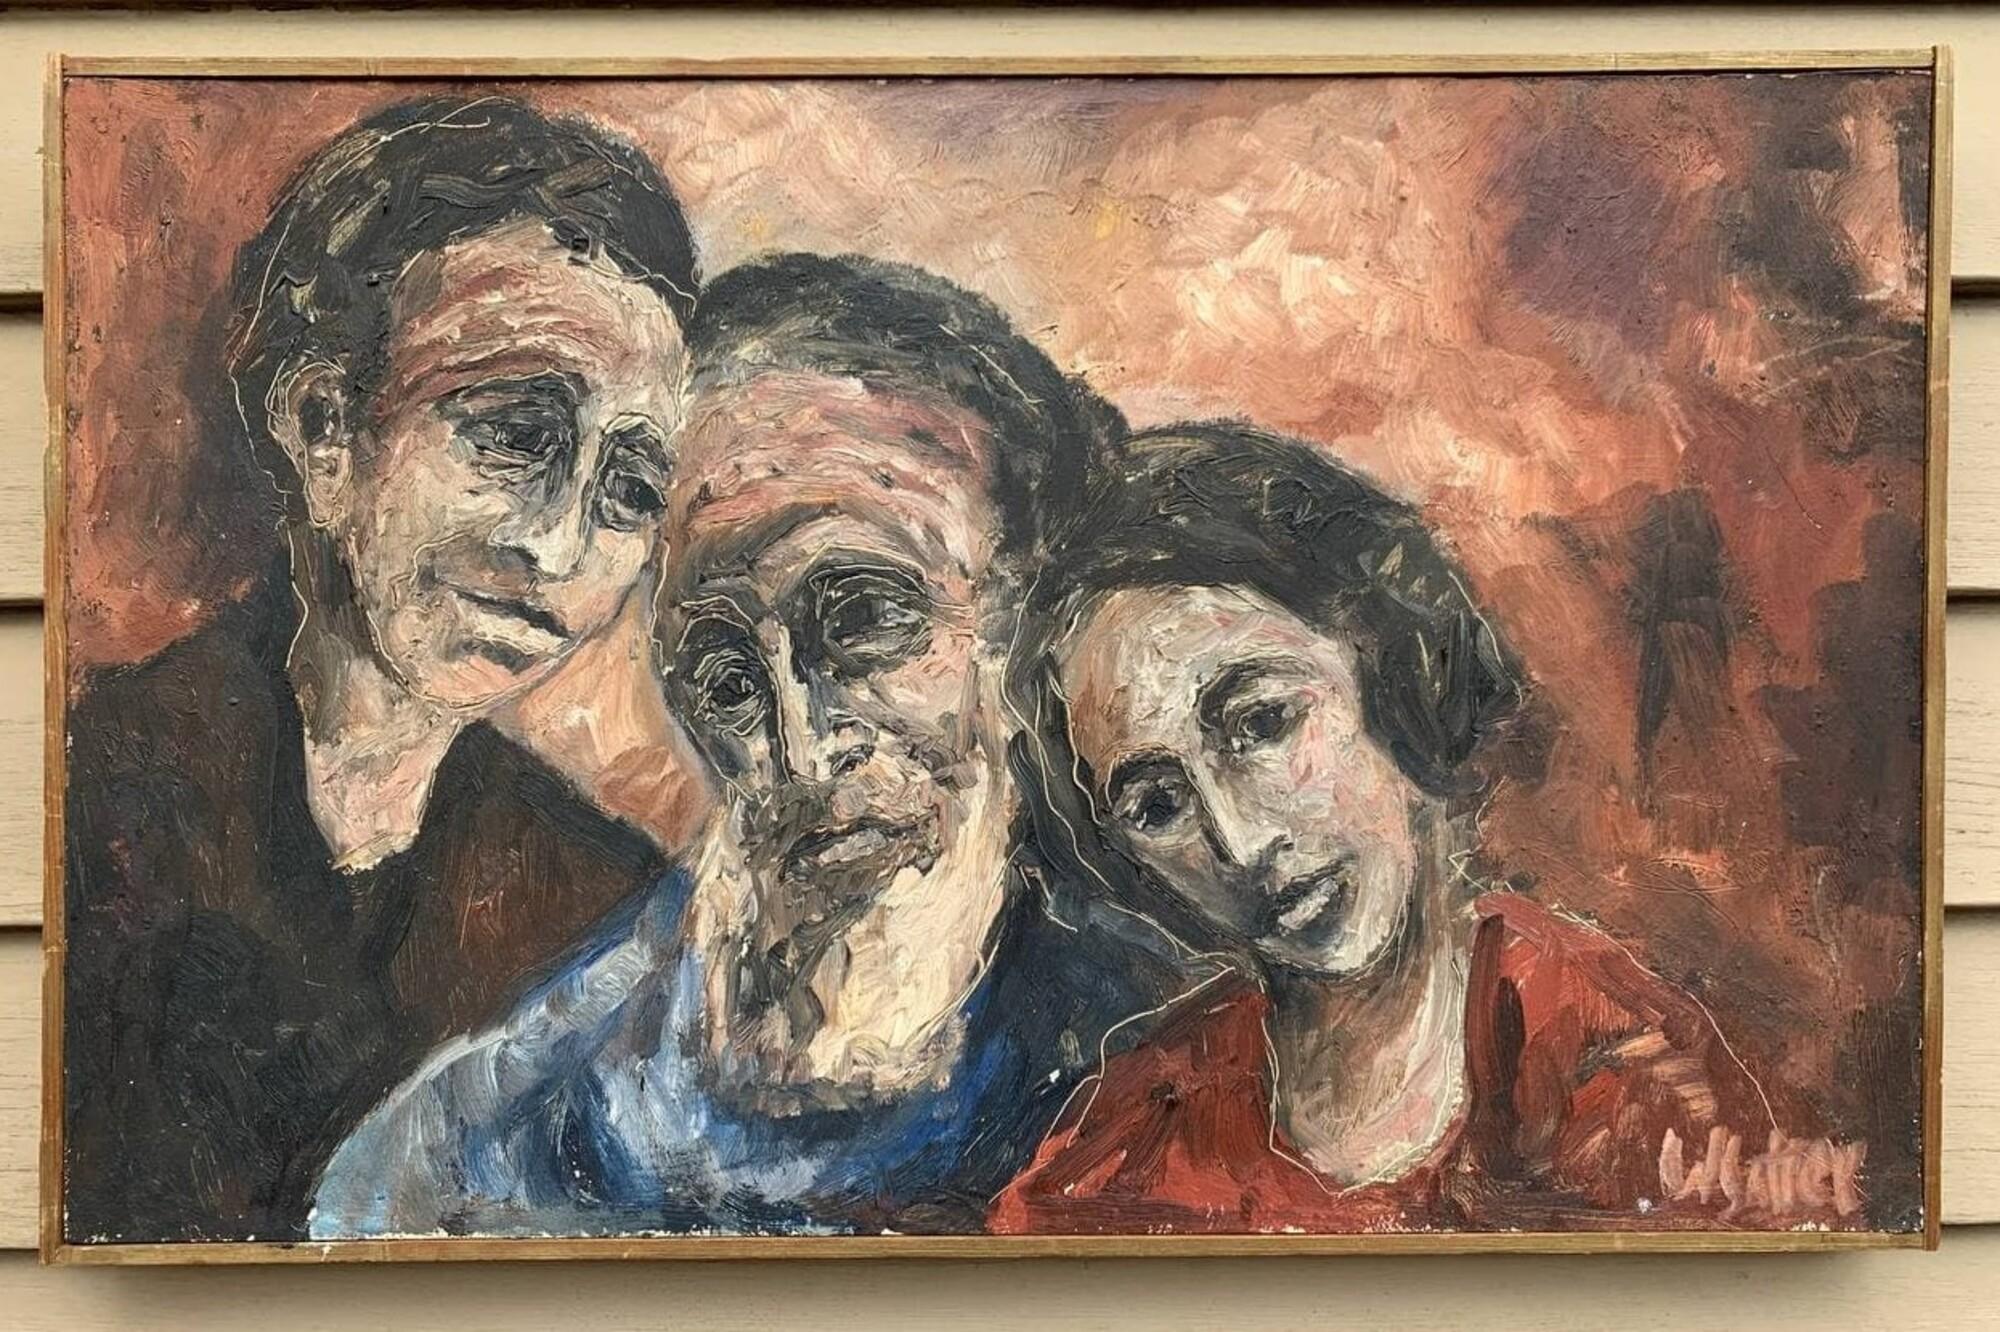 Up for sale is an original oil painting on board depicting a family portrait. Very textured. 

Indistinctly signed lower right. Looks to read W. Satter. Painted with impasto and scratching out. Dimensions: (Frame) H 15.5